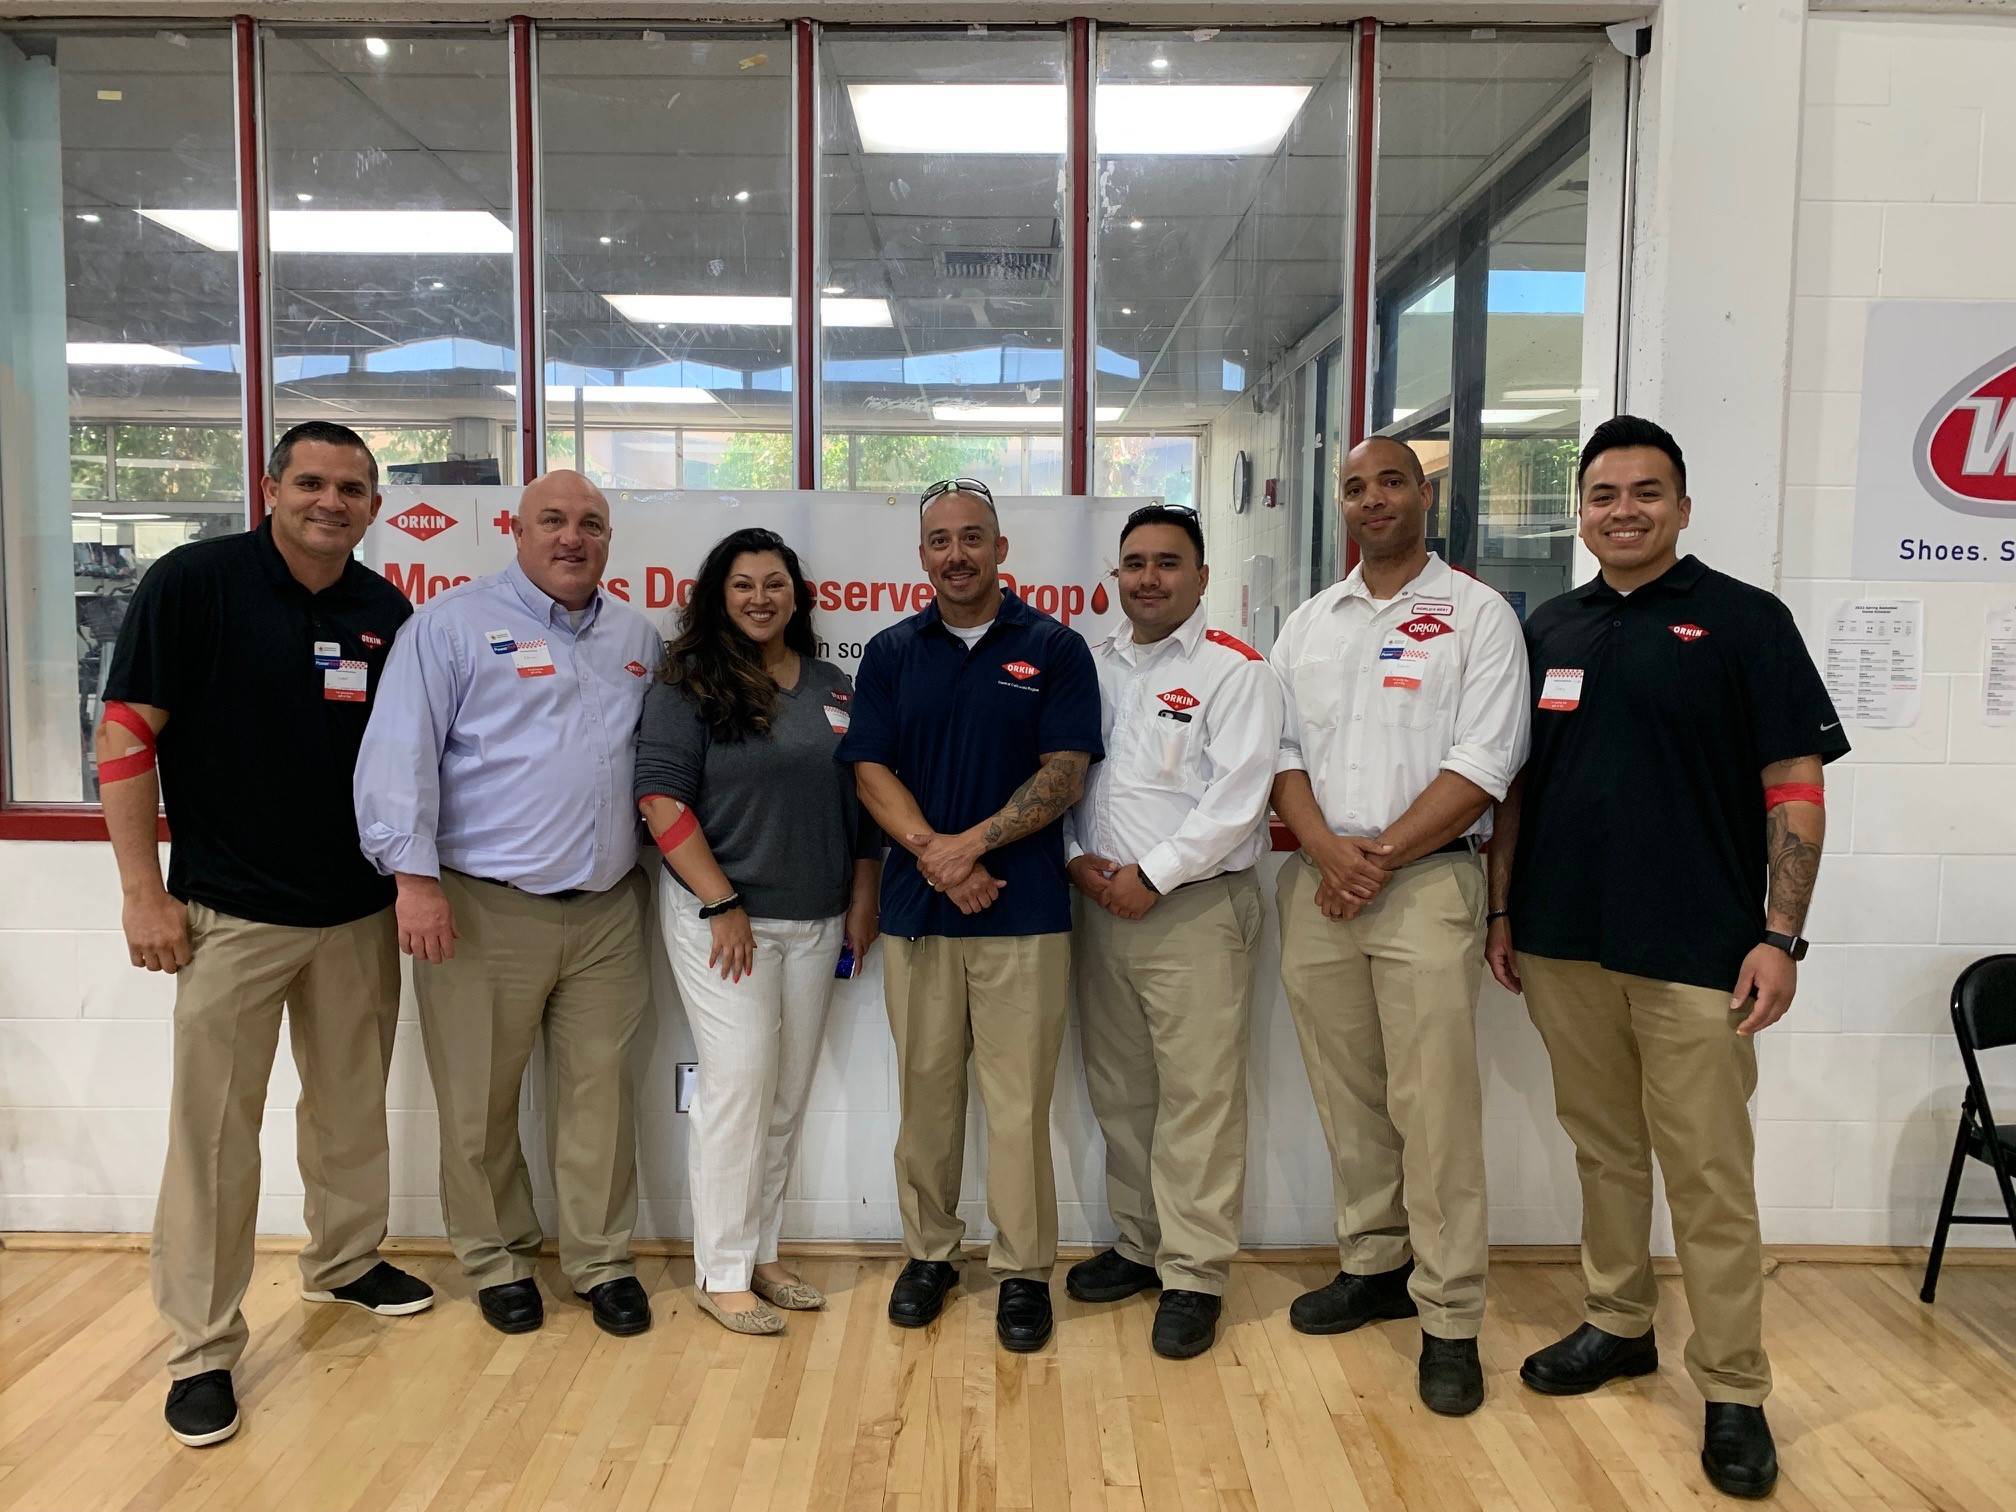 Orkin Pros posing for a photo after donating blood as part of Orkin's 2022 Los Angeles blood drive.